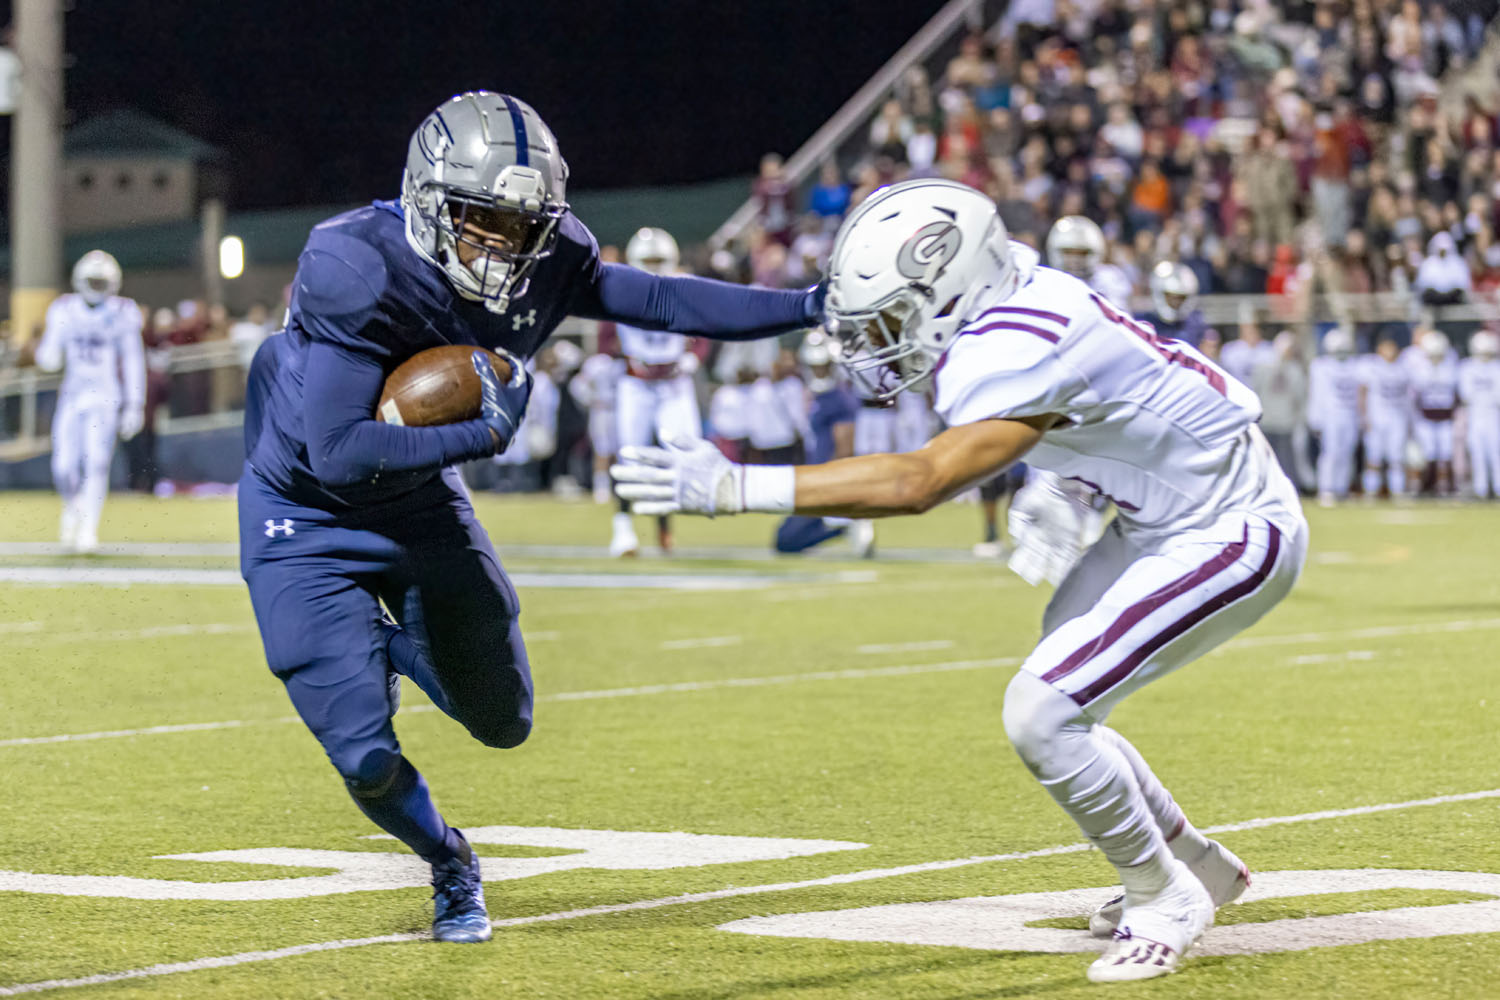 Clay-Chalkville survives scare from Gardendale